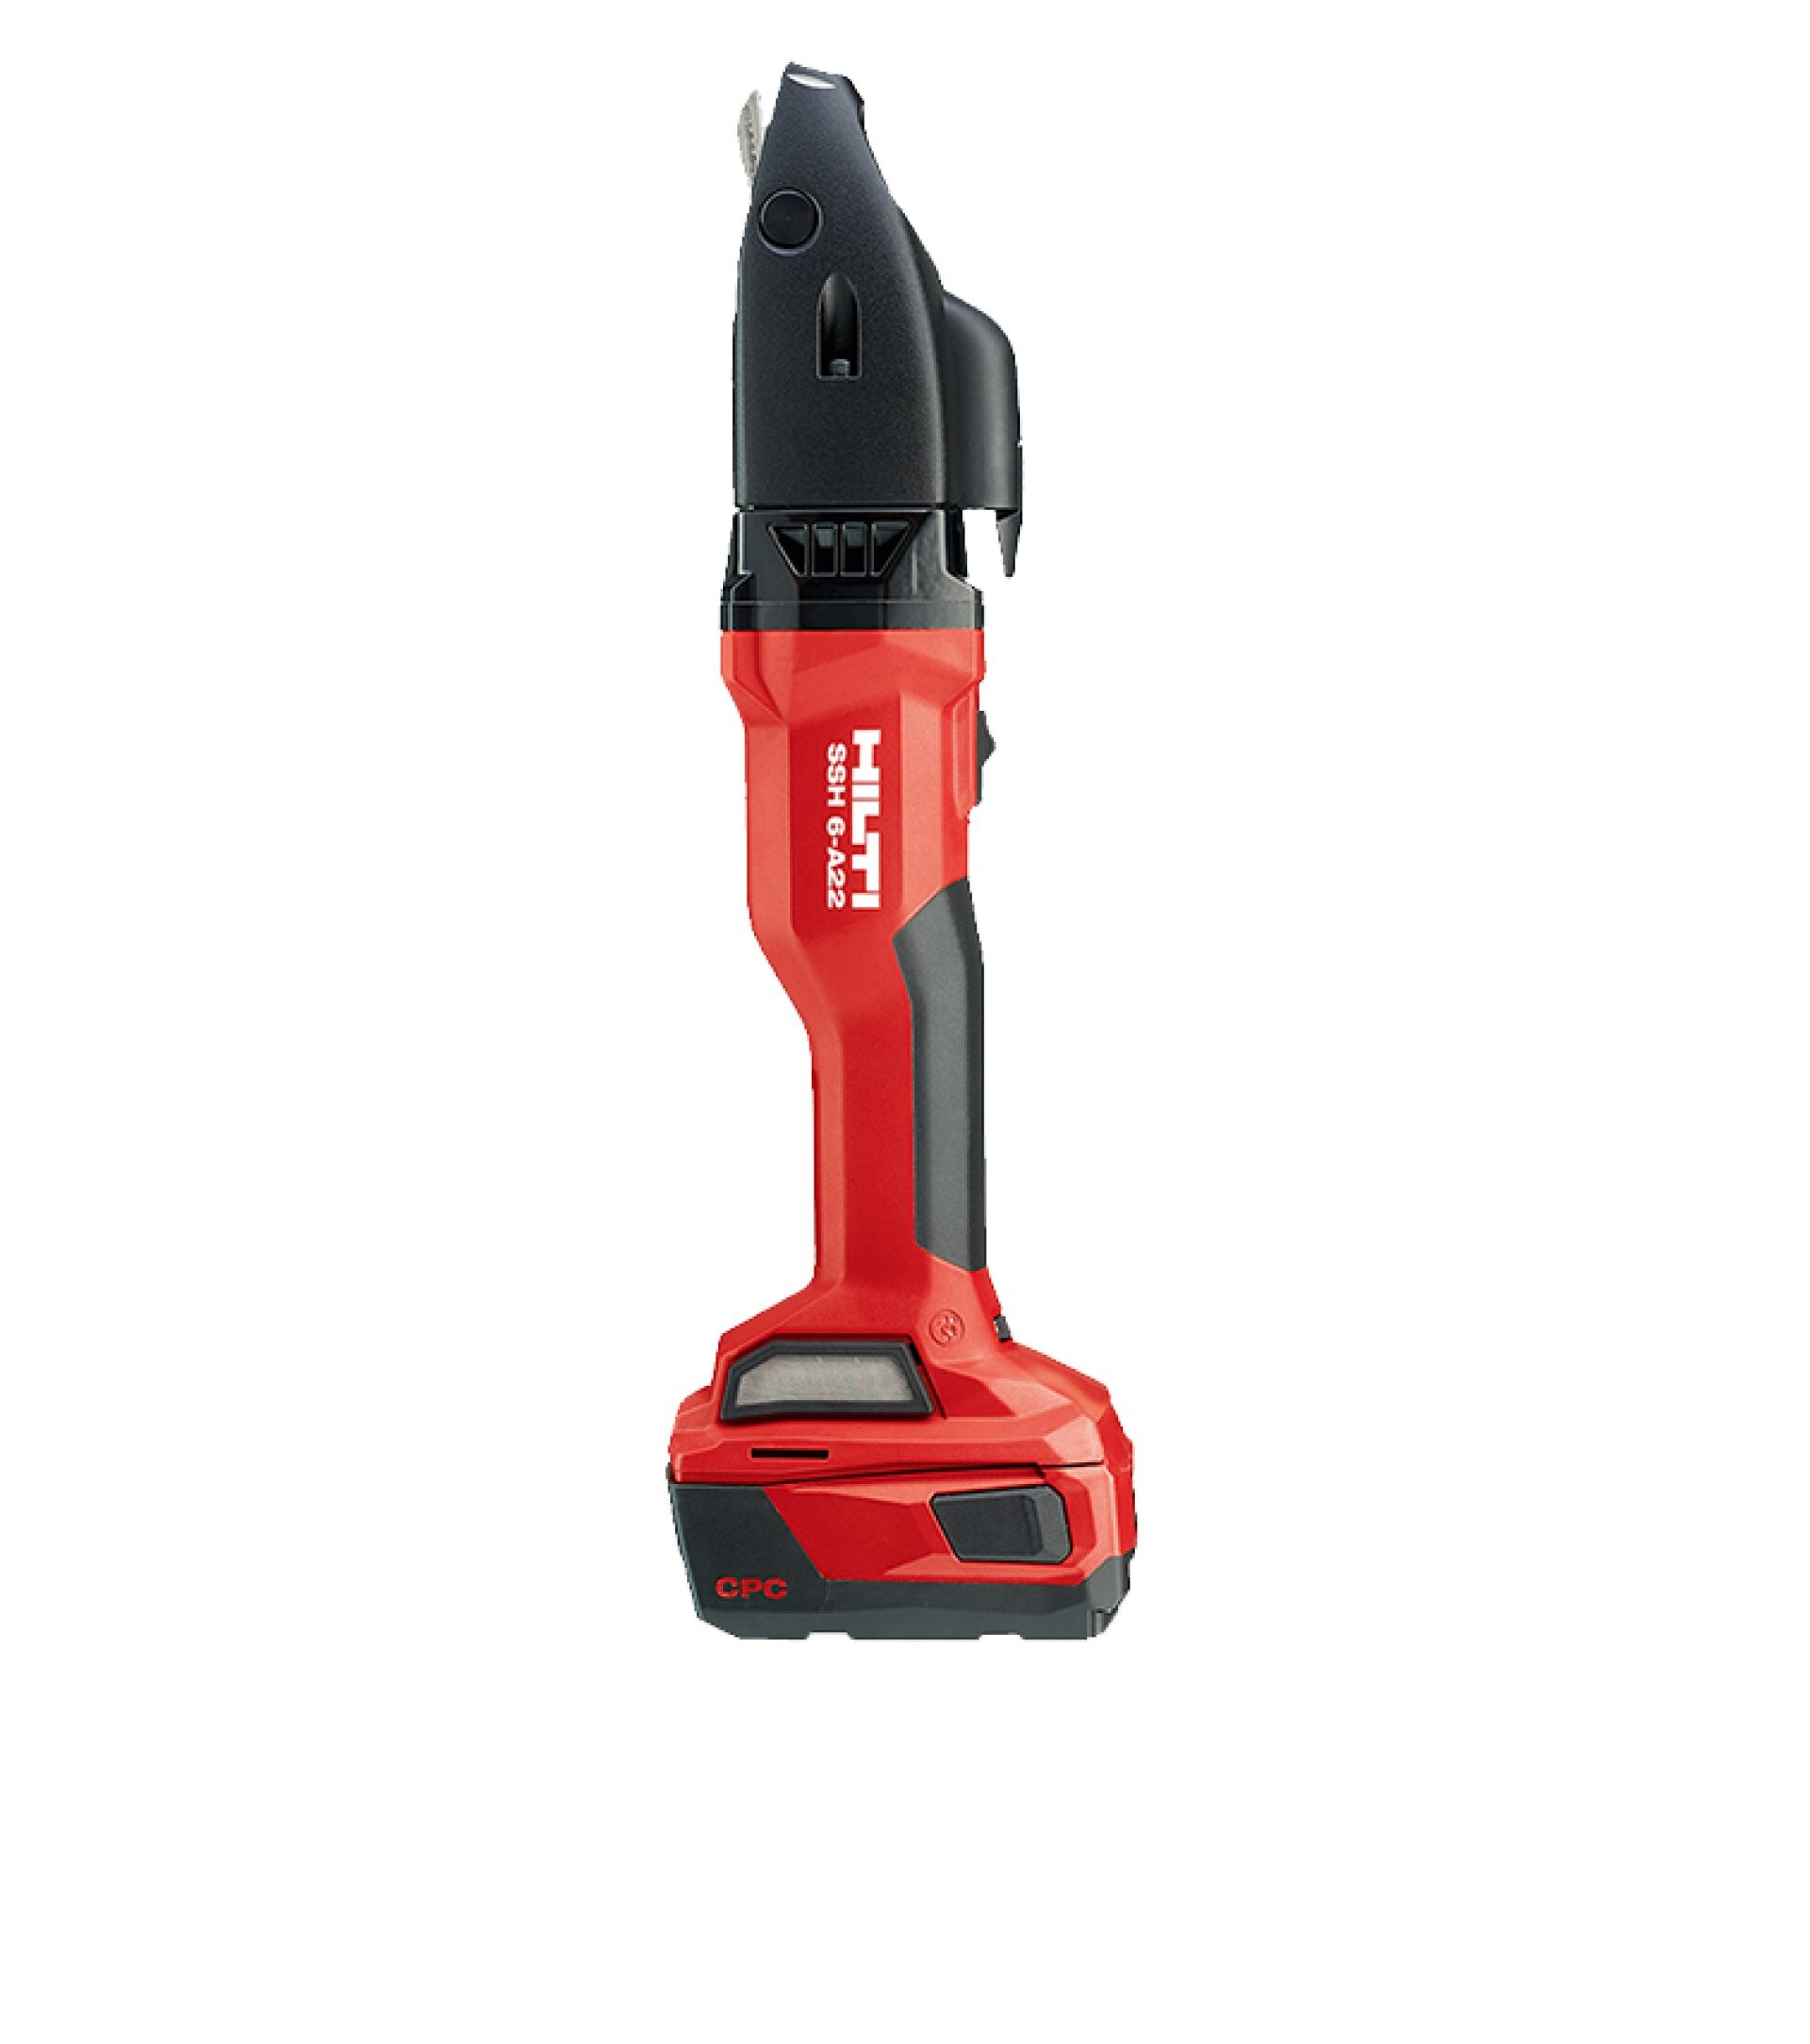 Introducing the SSH 6-A22 cordless double cut shears